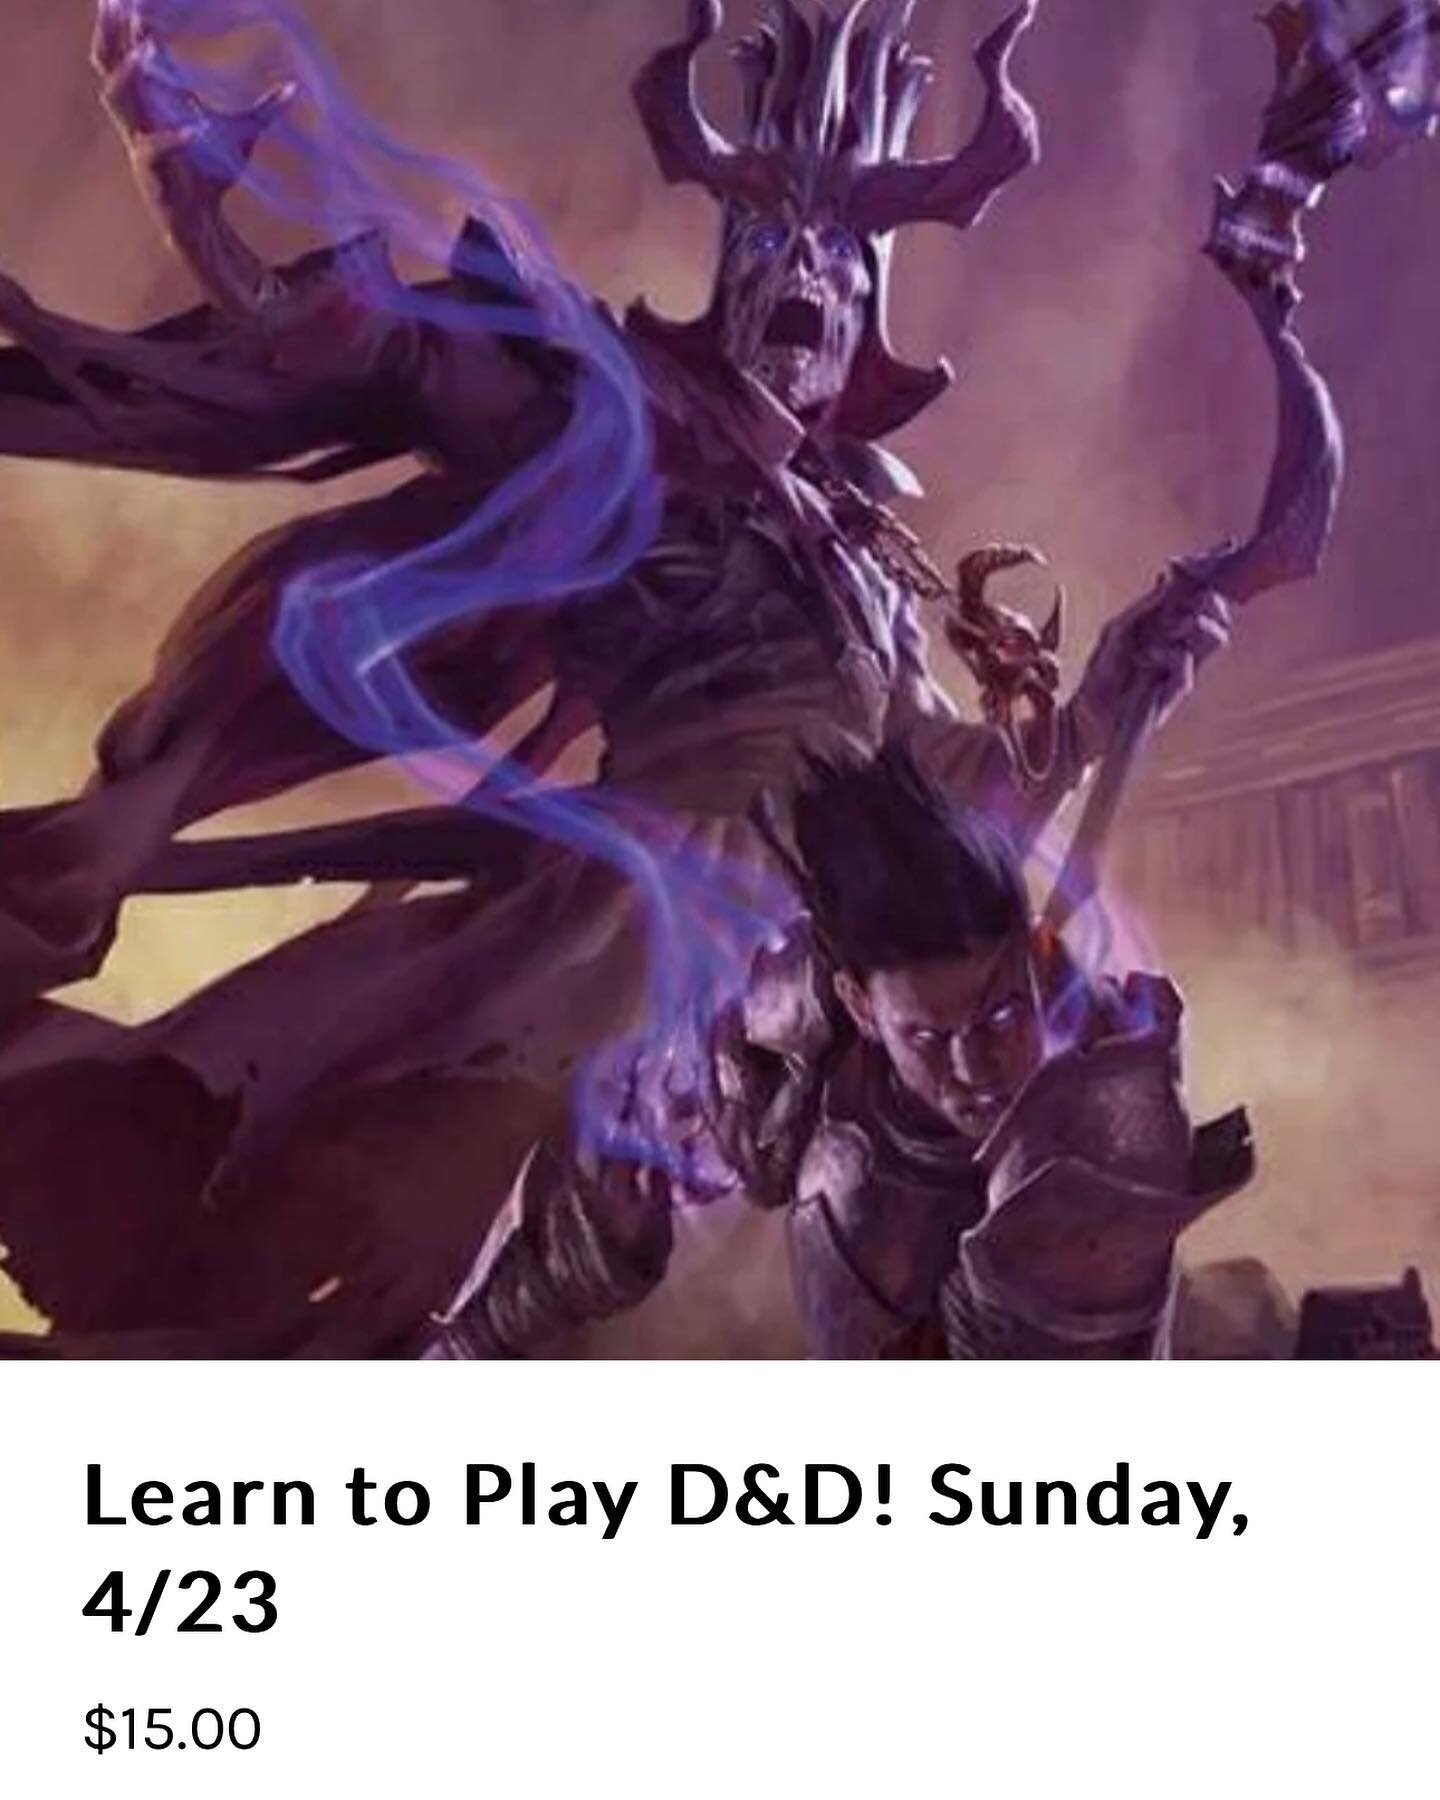 Interested in learning how to play Dungeons &amp; Dragons? Come join us on April 23, 3-6pm. Our Dungeon Master will teach you the basics and lead you on your first adventure! Players will be given pre-generated characters and will play through an int